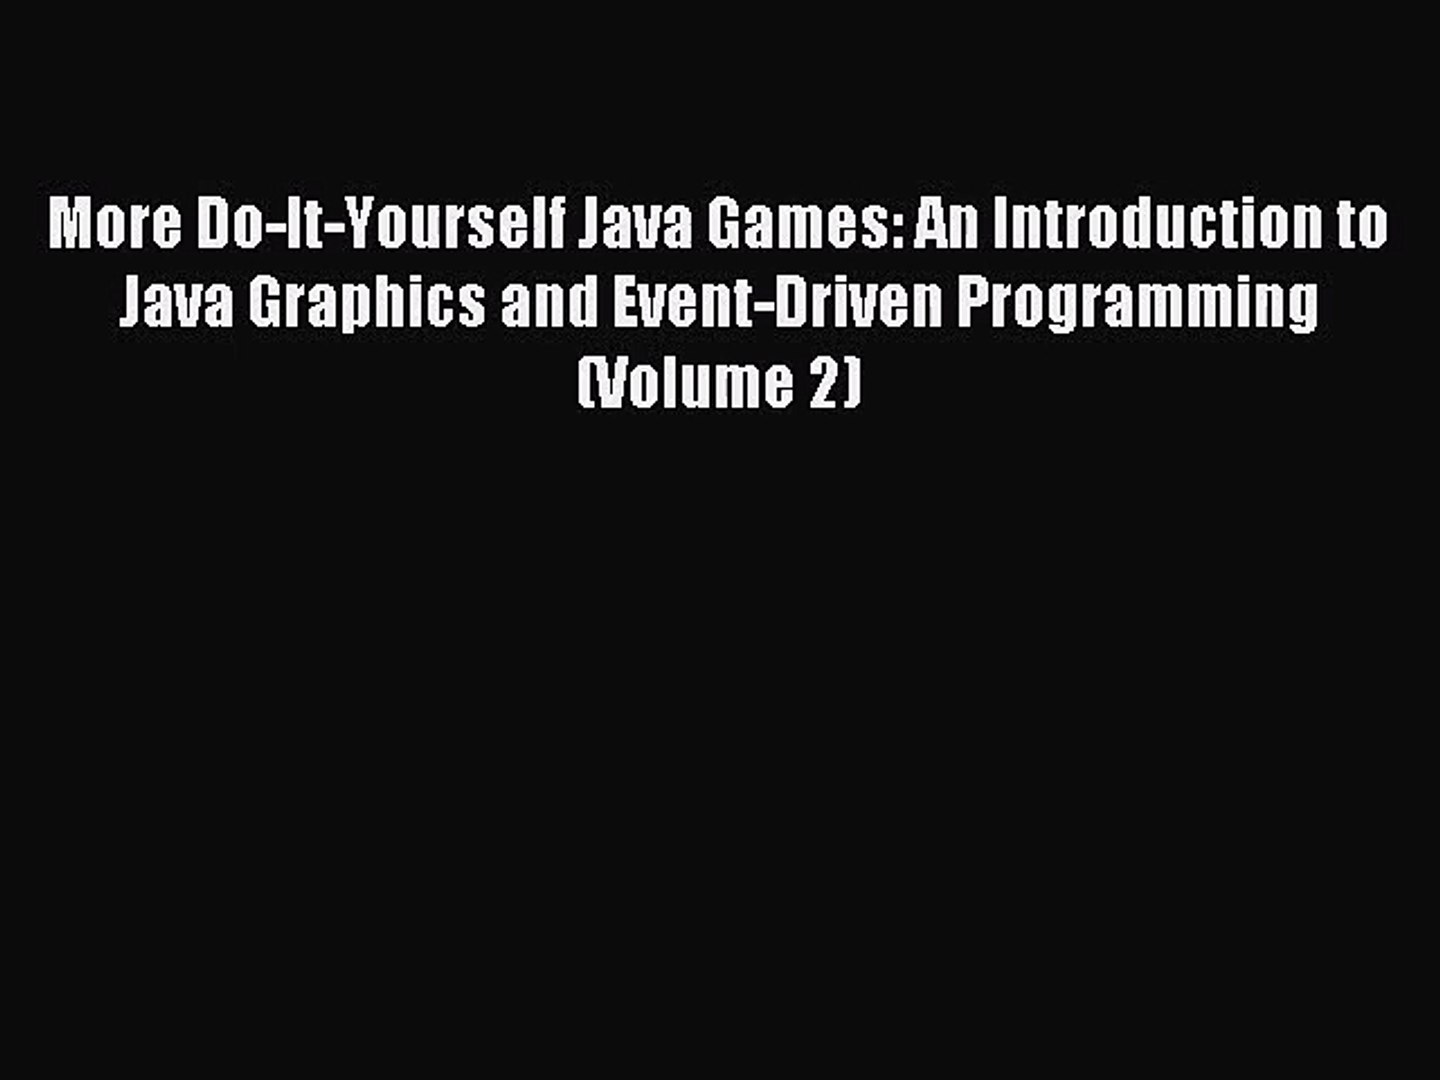 More Do-It-Yourself Java Games: An Introduction to Java Graphics and Event-Driven Programming